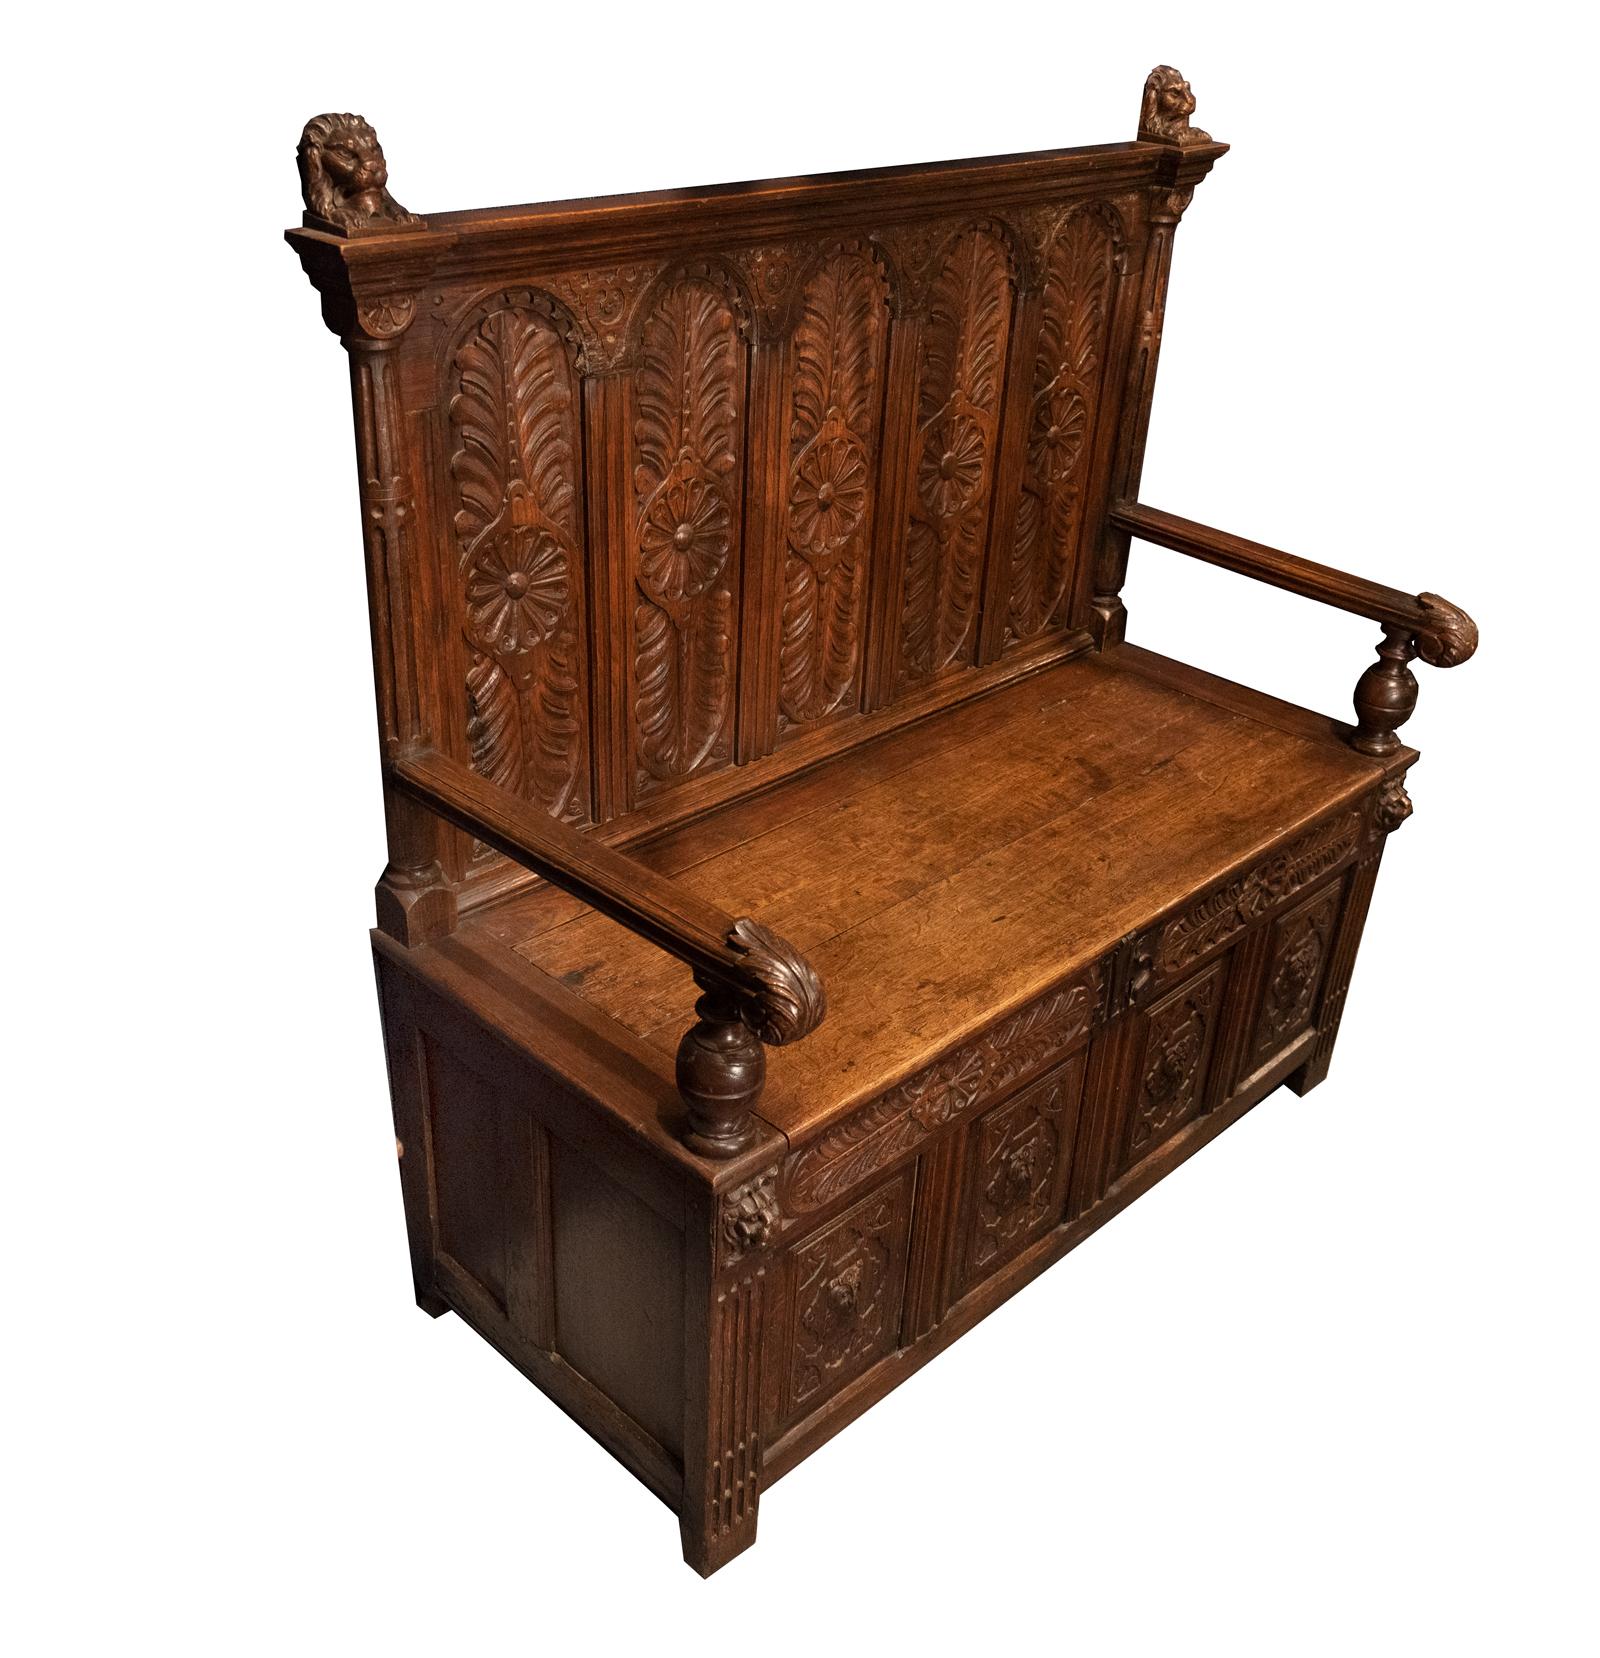 A carved oak hall bench created in England during the 19th century using older elements salvaged from period furniture. Designed to emulate the designs of early 17th century furniture. The seat hinges to reveal a storage compartment.

Measures: